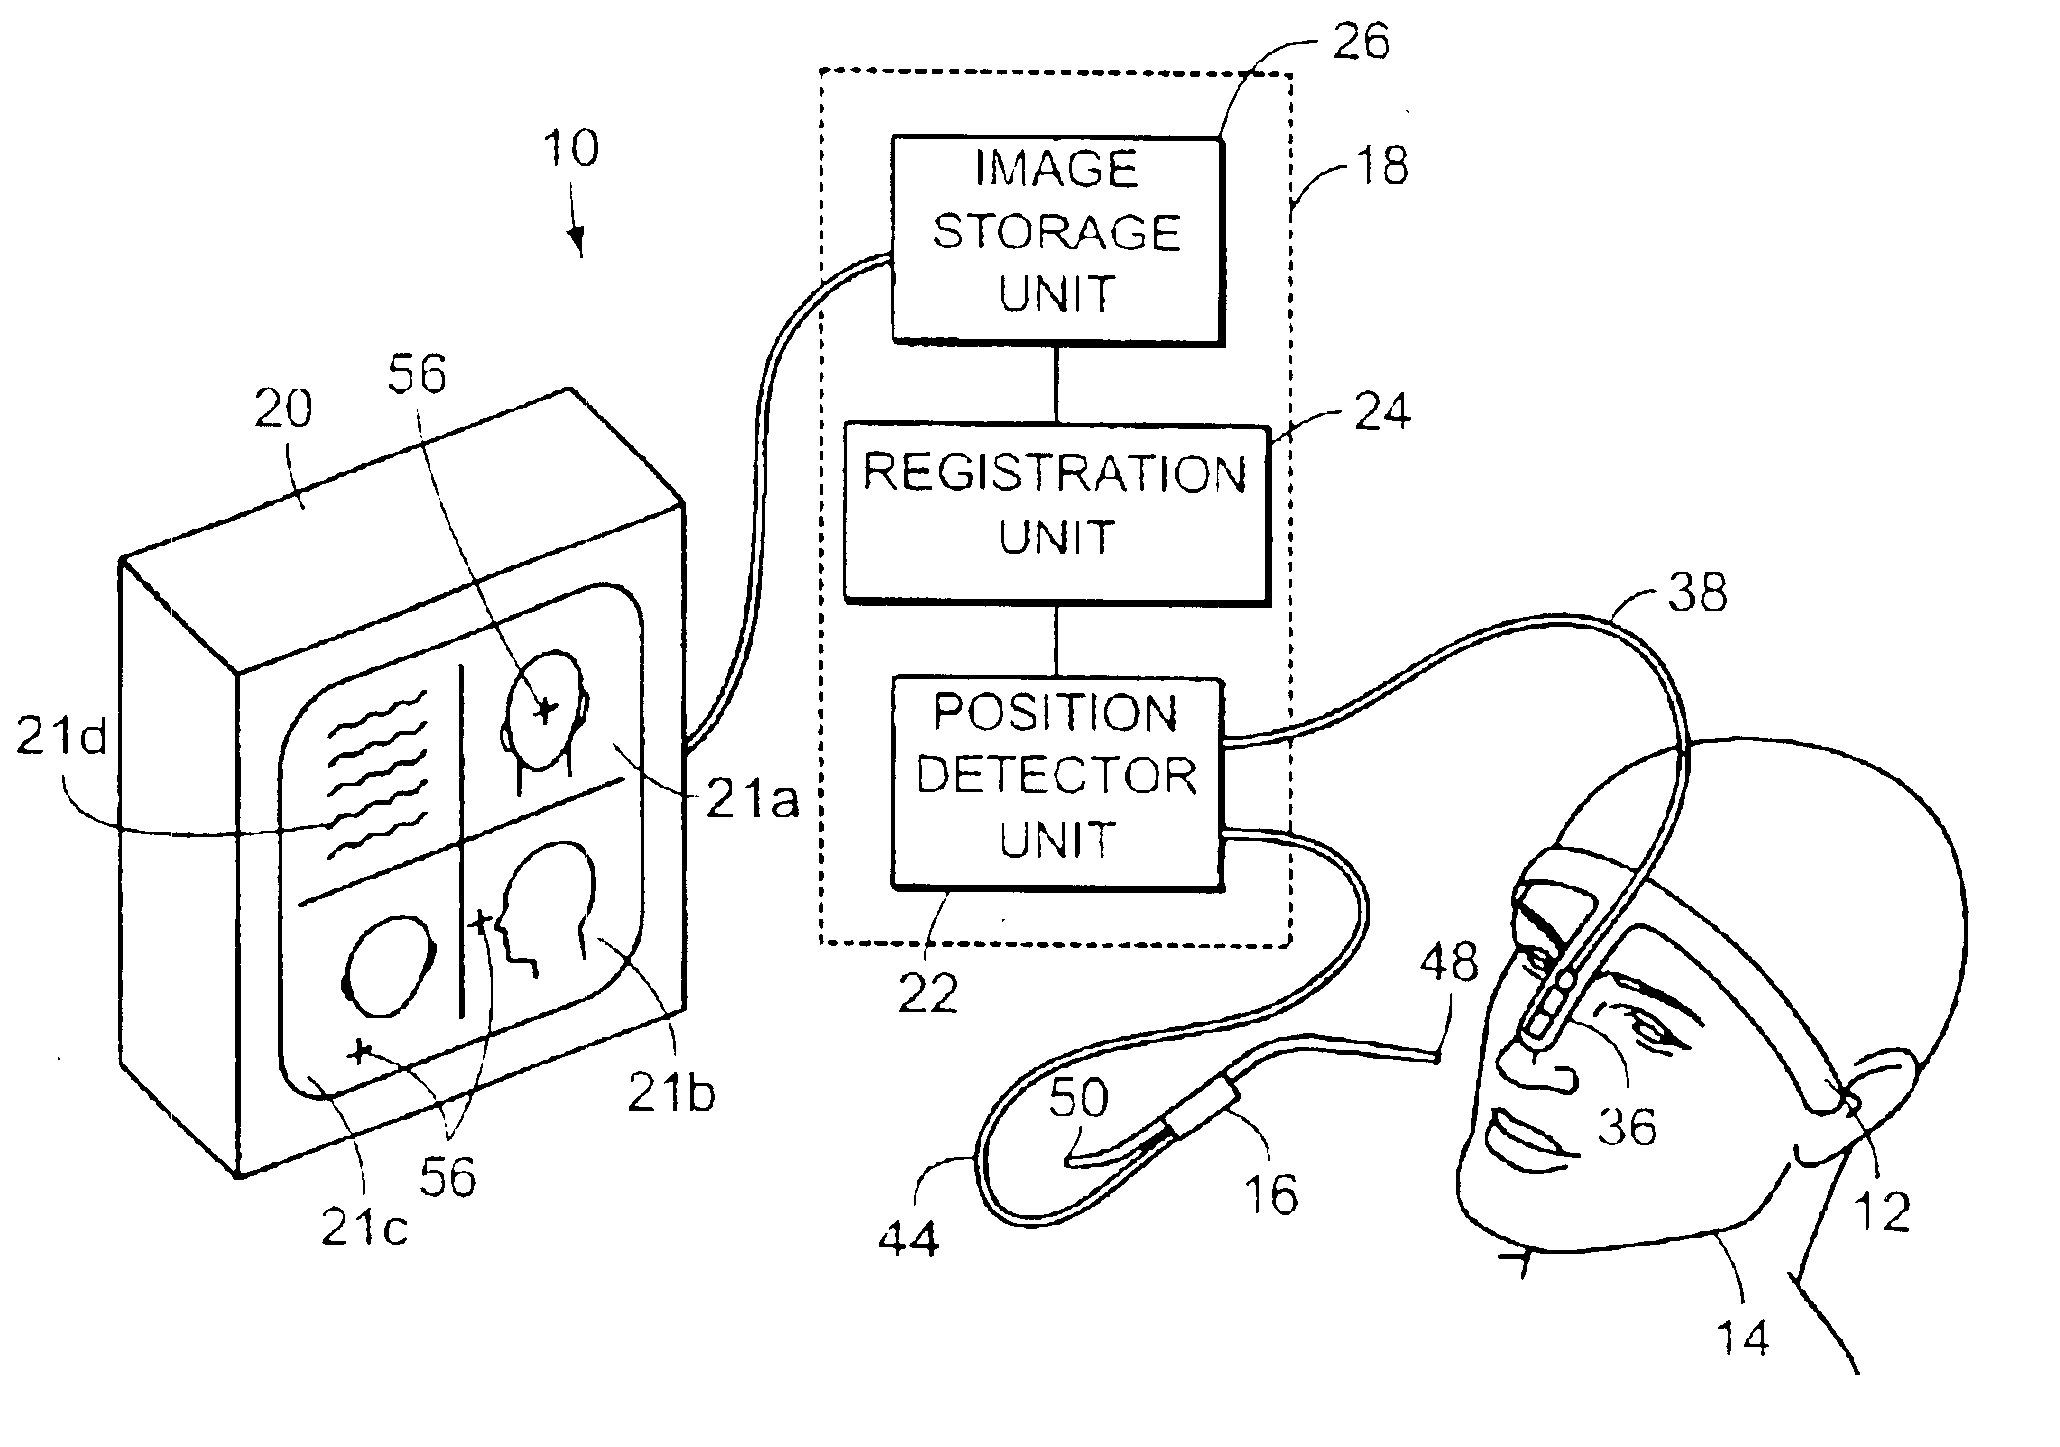 Position tracking and imaging system for use in medical applications